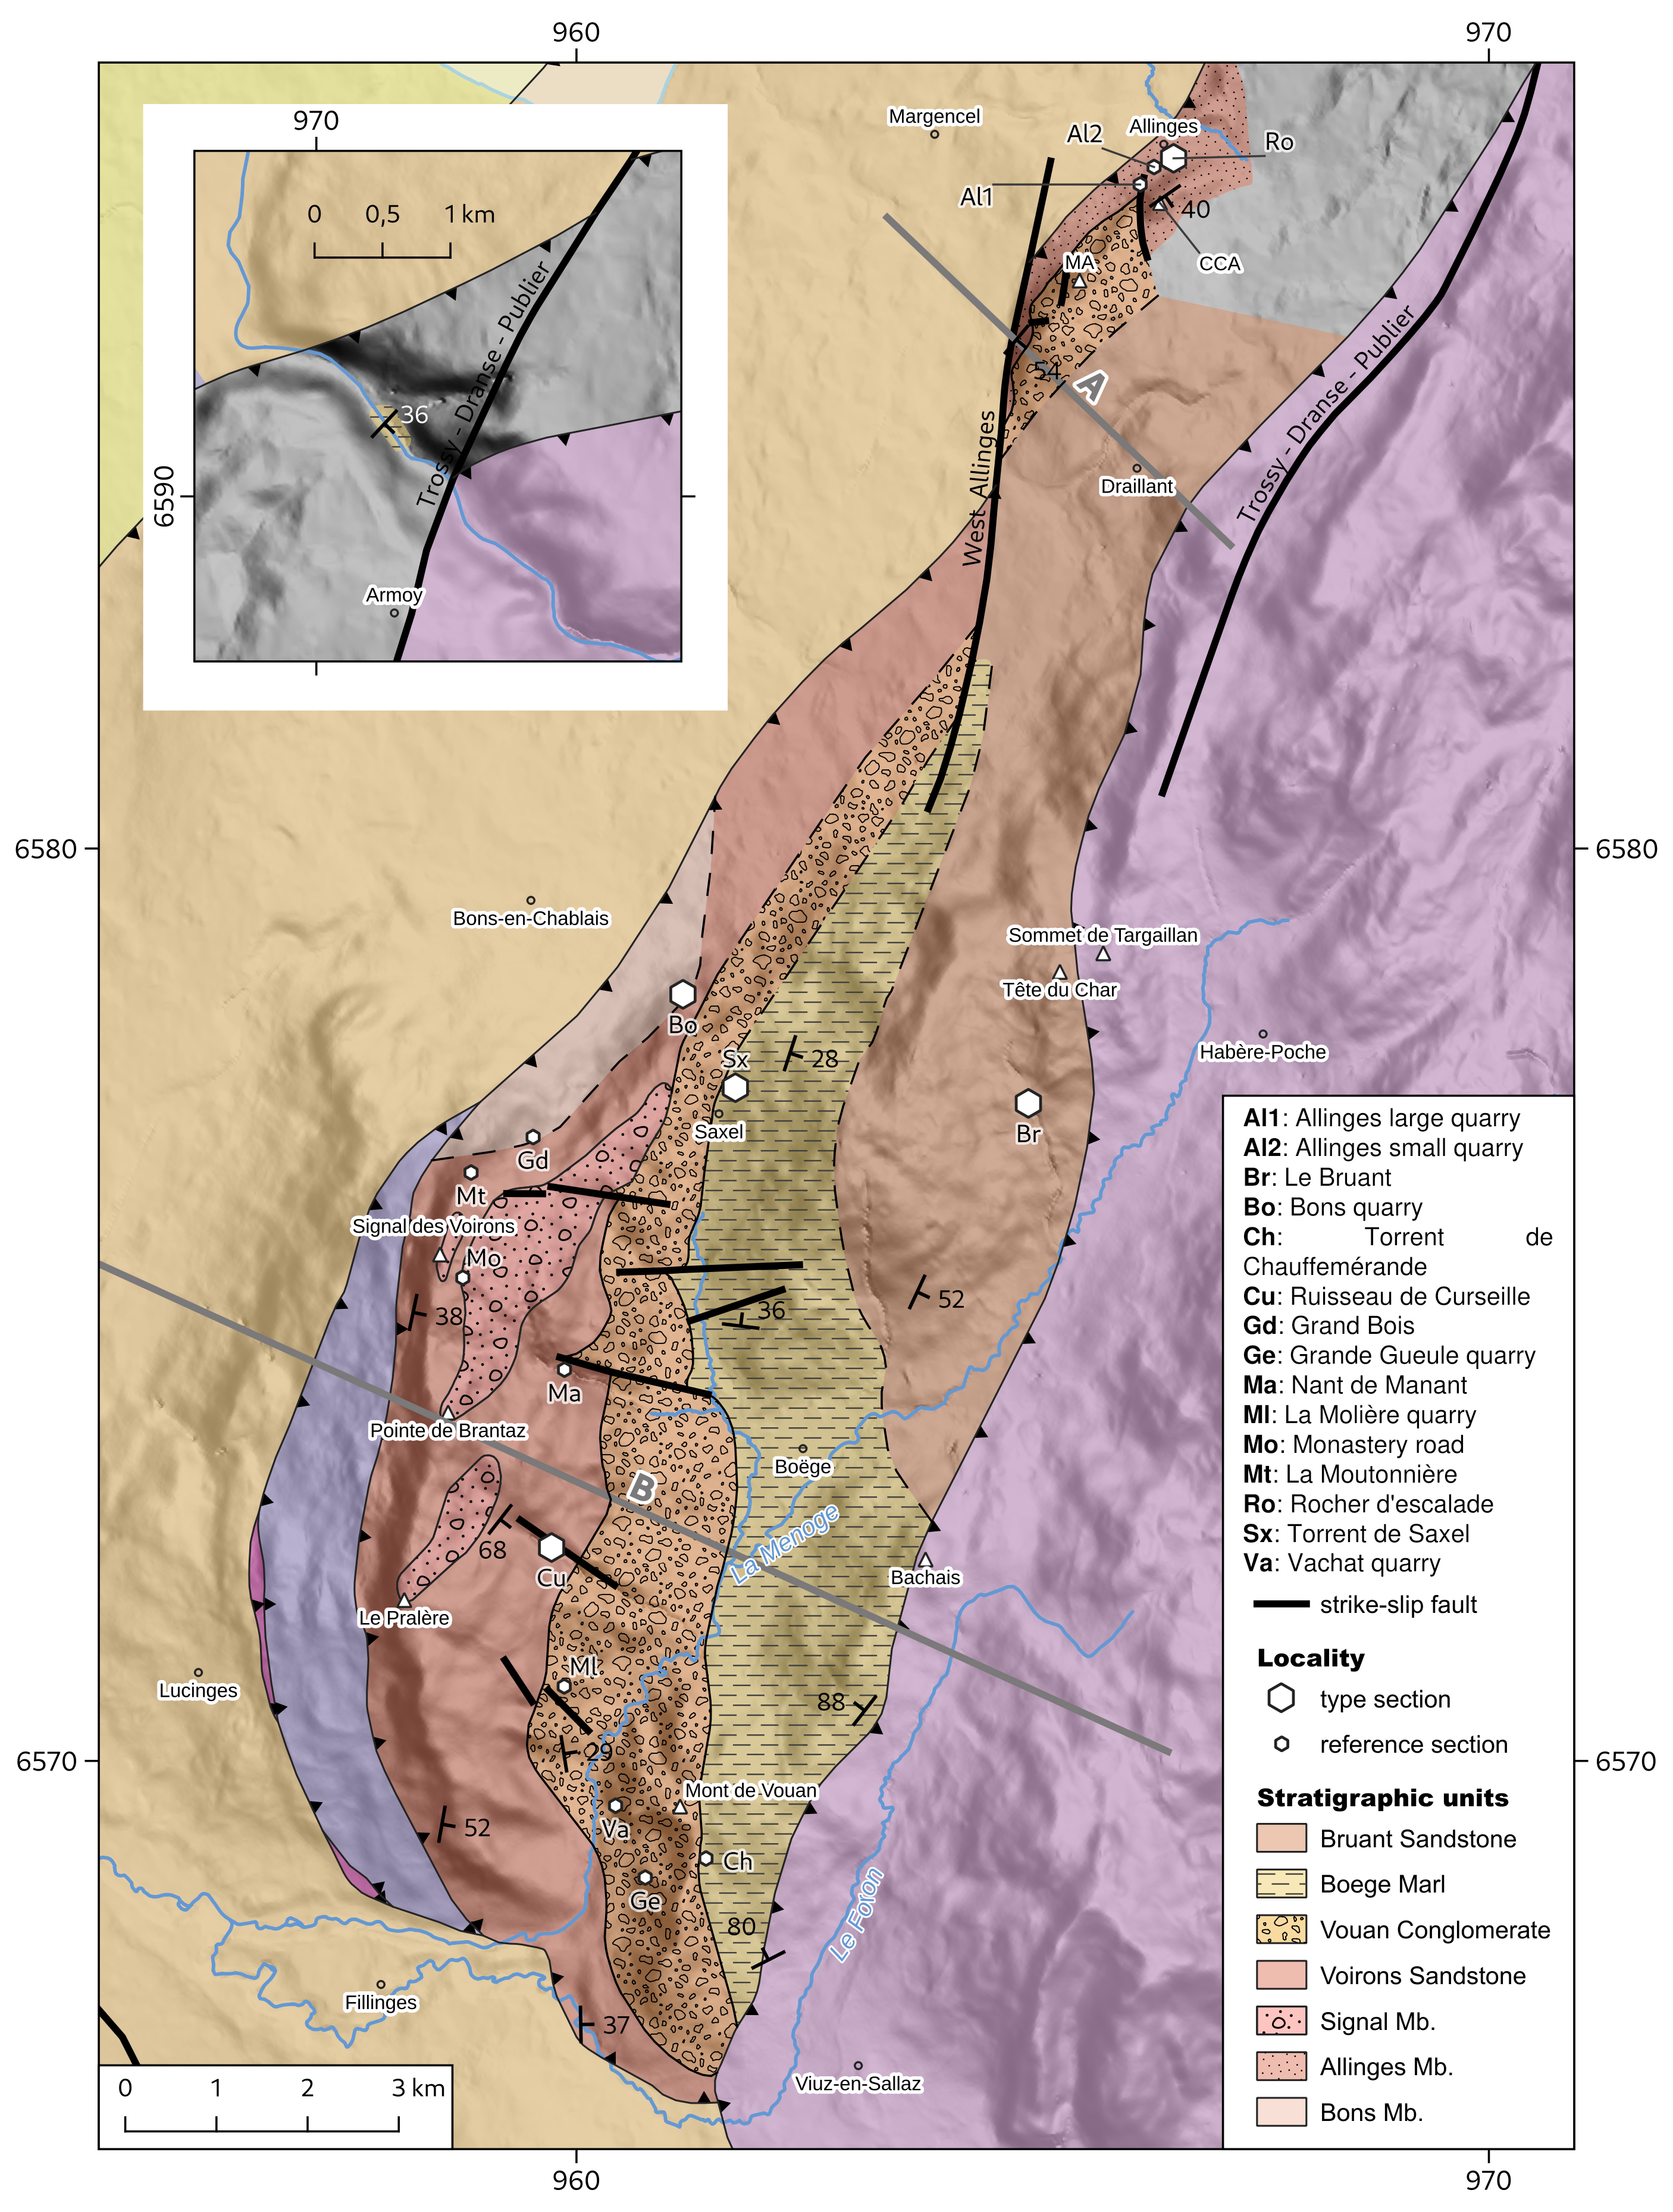 Geologic map of the Voirons flysch in the western part